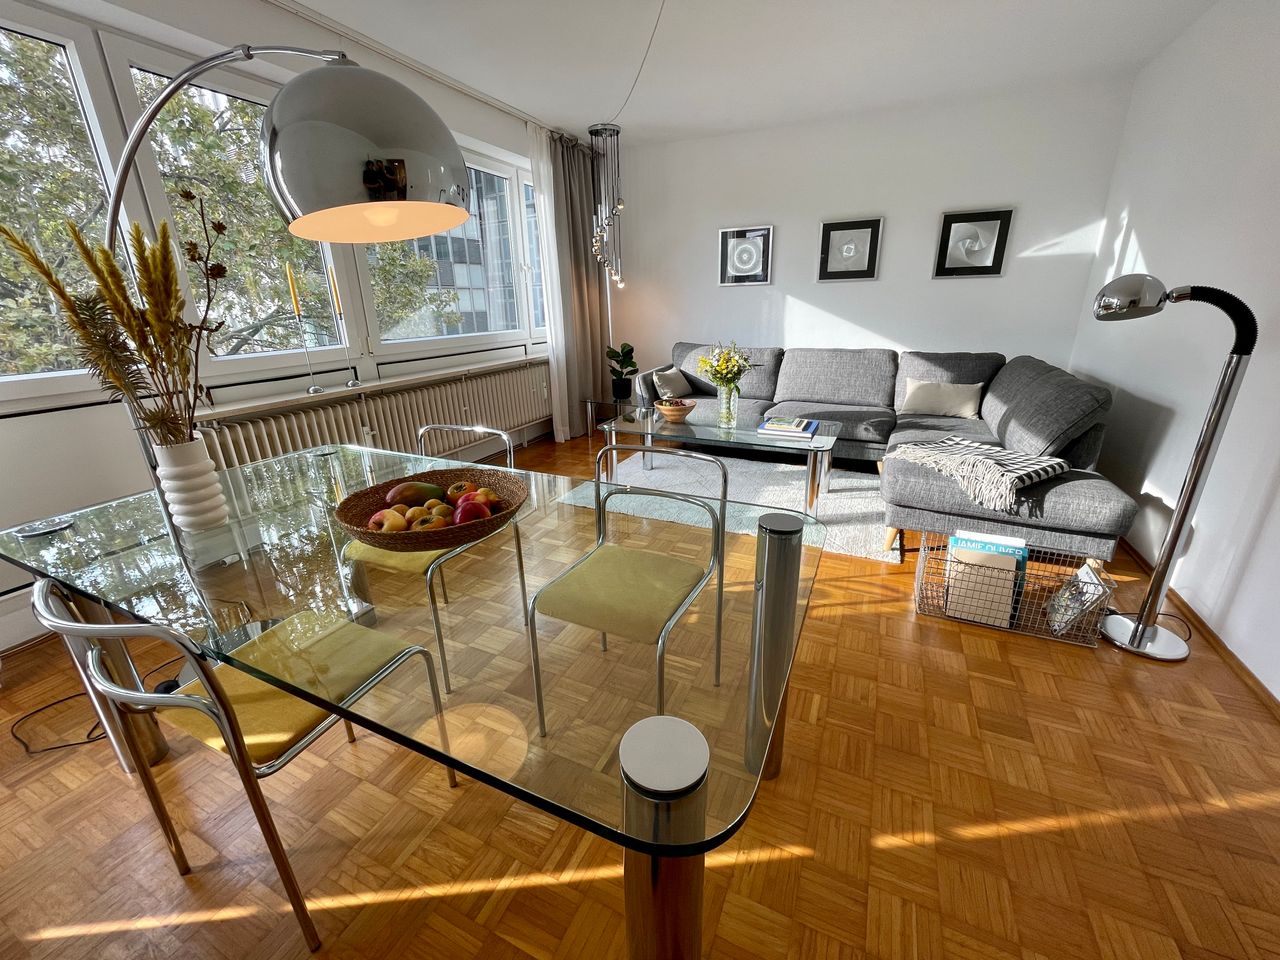 Sunny, spacious apartment with balcony, lift and garage in the centre of the old town